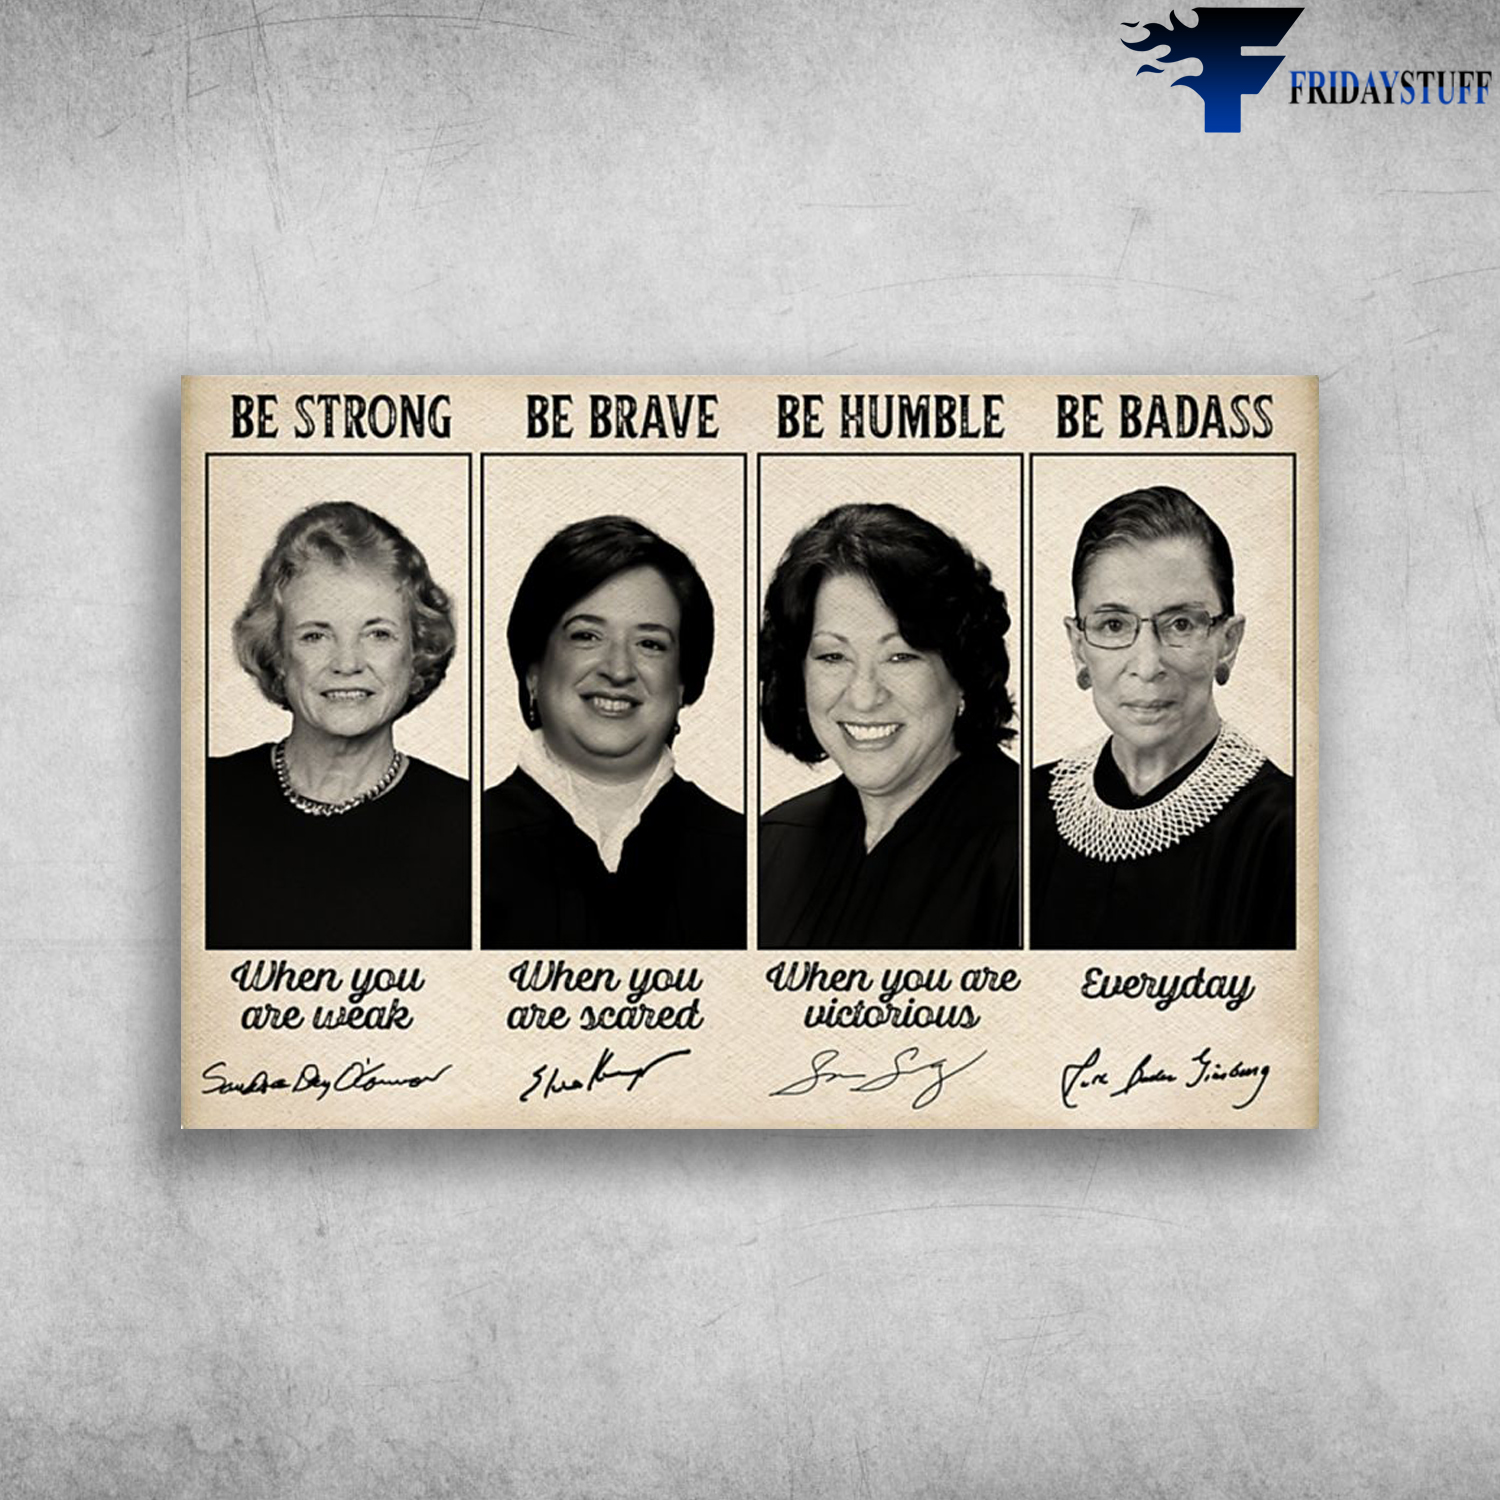 Ruth Bader Ginsburg, Sandra Day O'Connor, Sonia Sotomayor, Elena Kagan - Be Strong When You Are Weak, Be Brave When You Are Scared, Be Humble When You Are Victorious, Be Badass Everyday